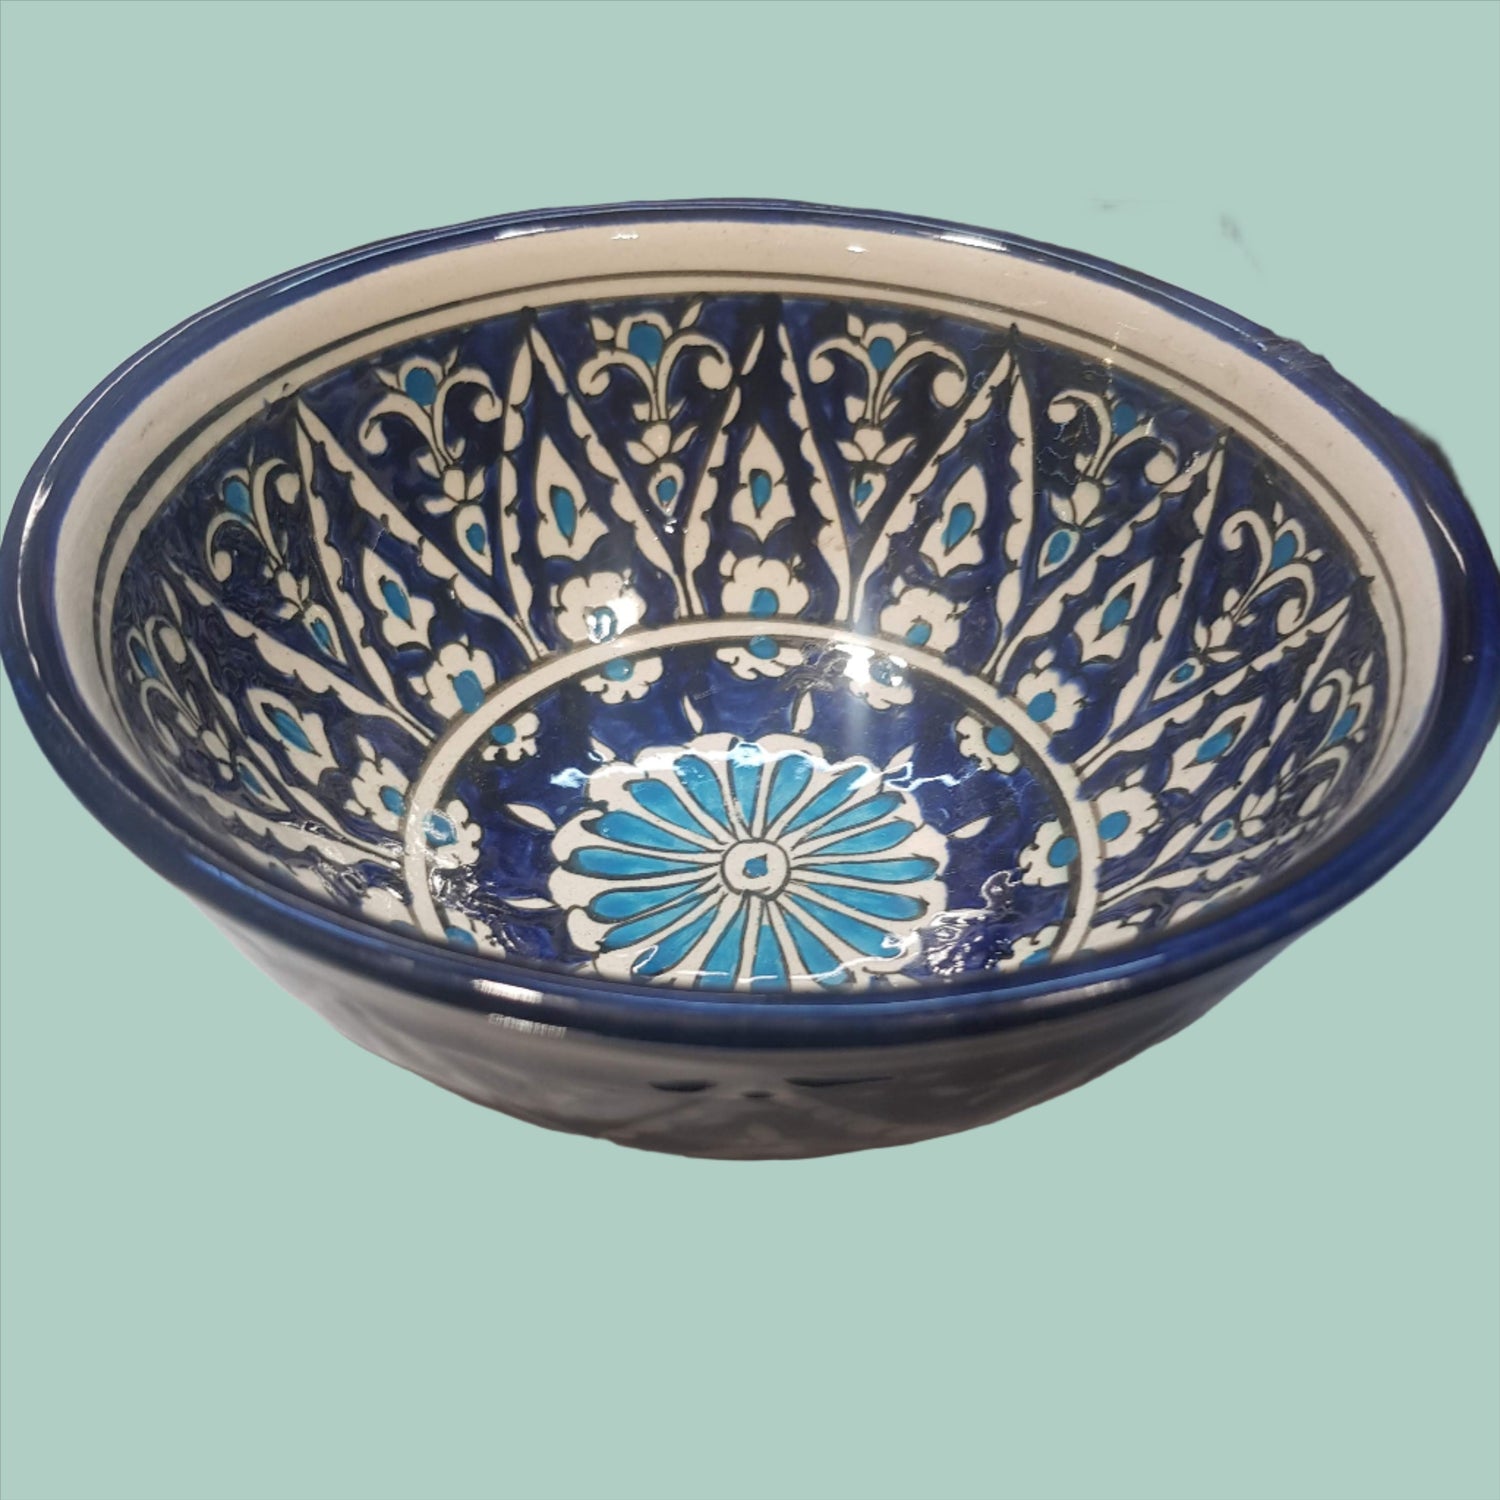 Bluenoemi Jewelry Home-Decor Ceramic bowl for serving or decoration. Flowers motif.